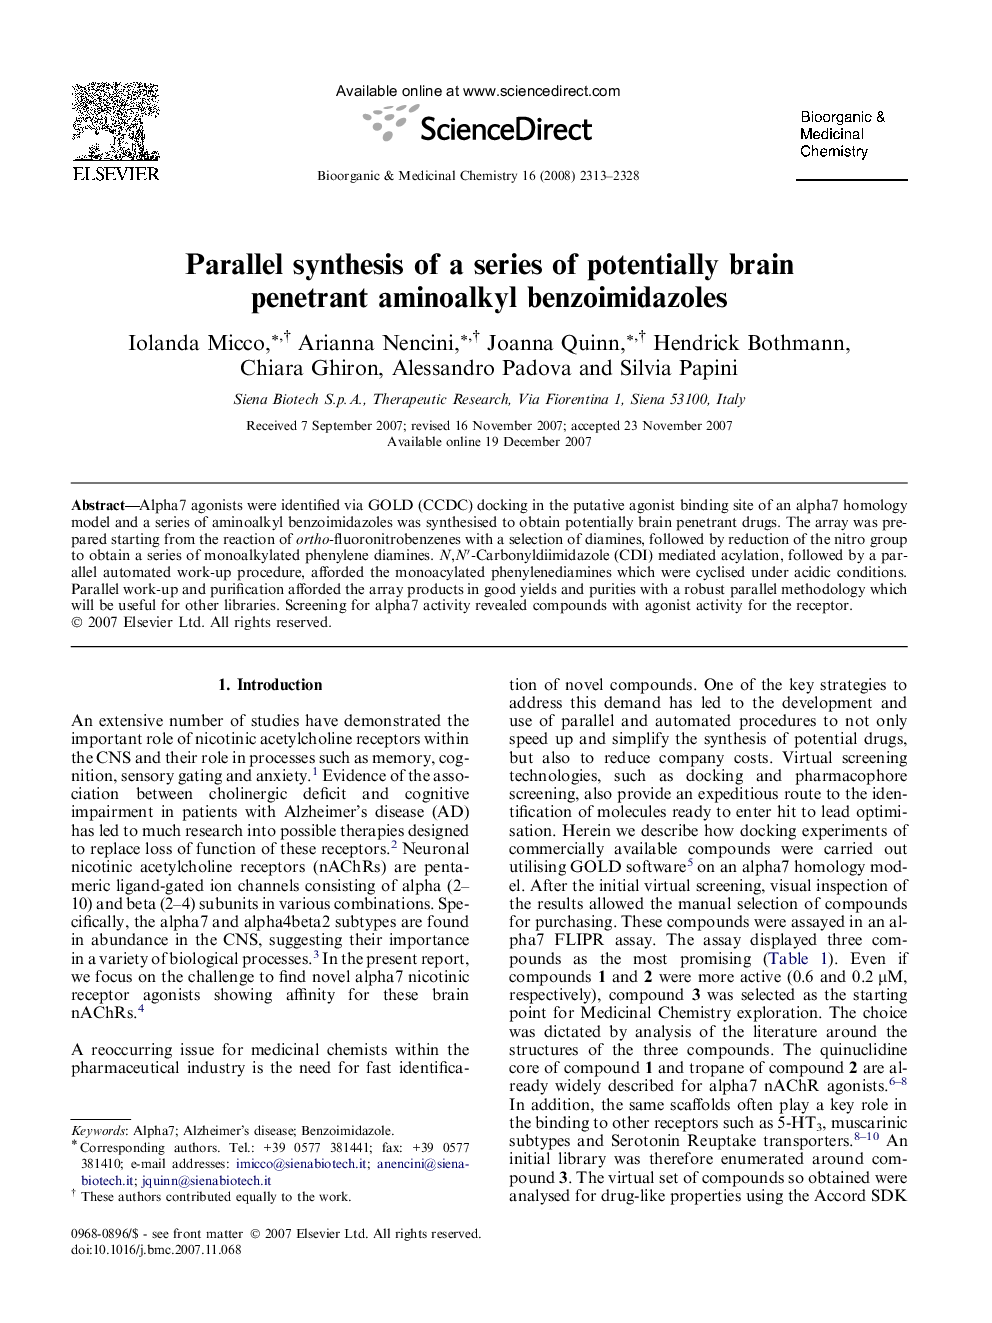 Parallel synthesis of a series of potentially brain penetrant aminoalkyl benzoimidazoles